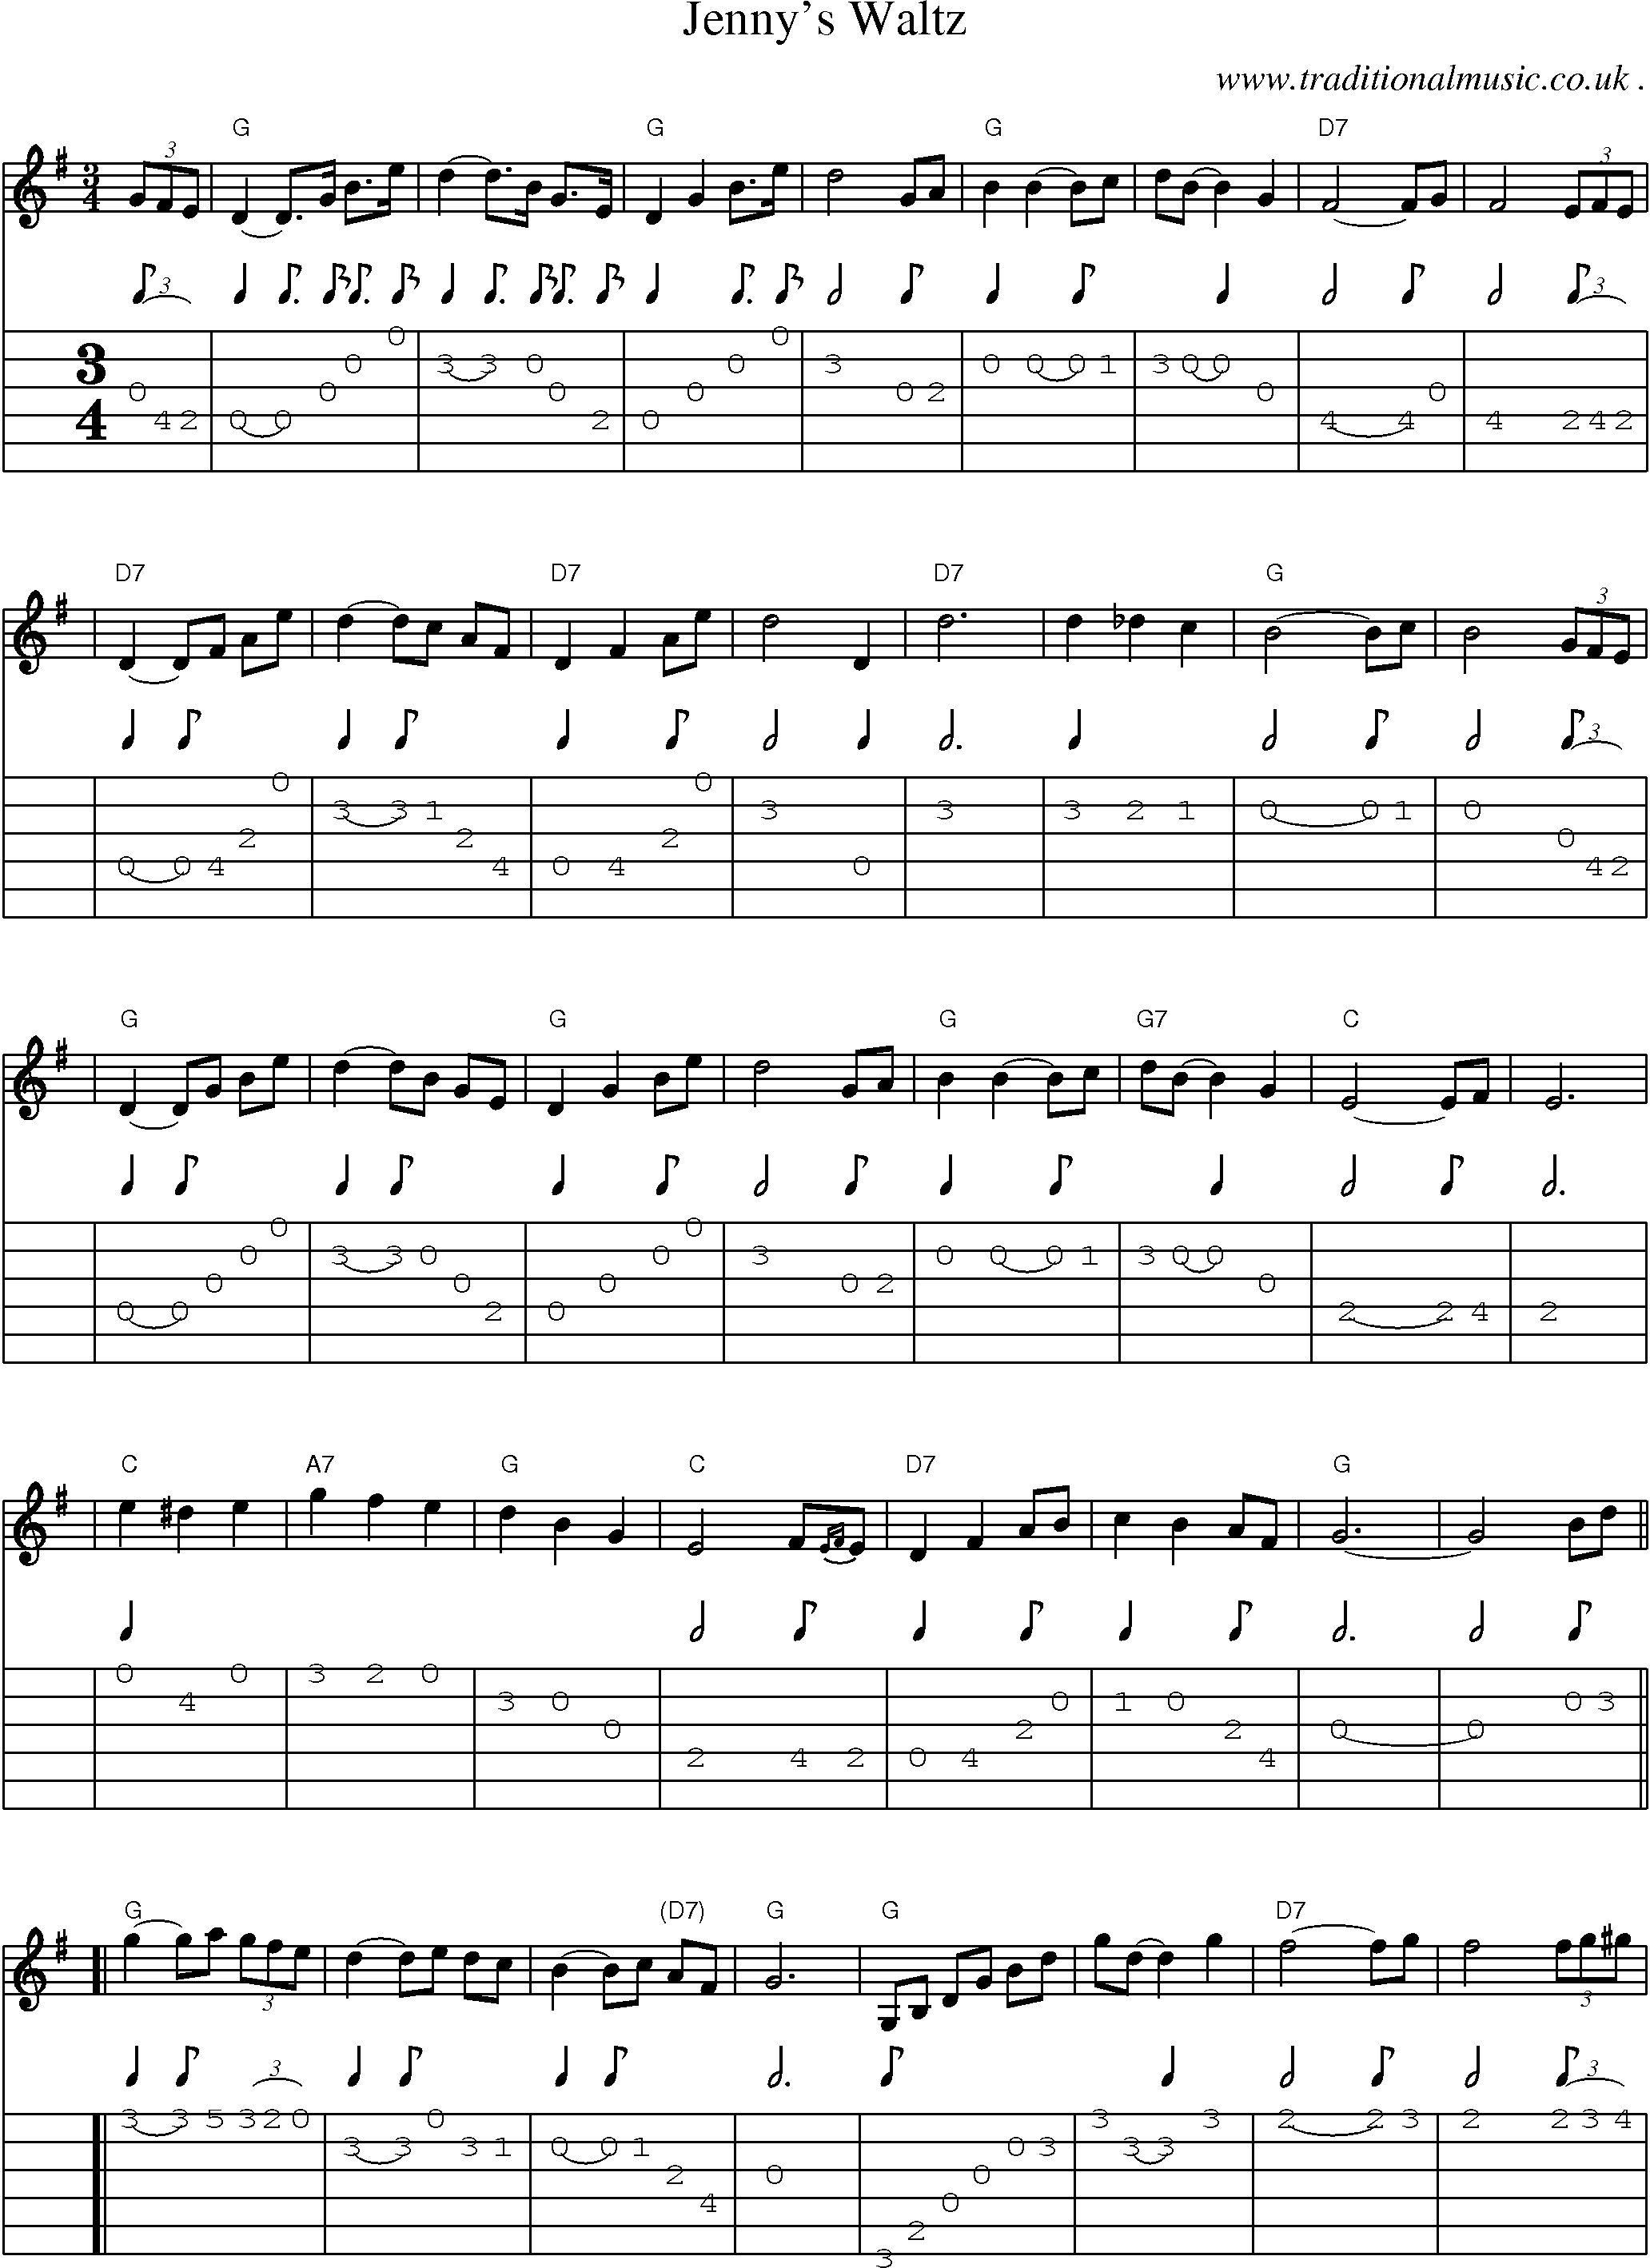 Music Score and Guitar Tabs for Jennys Waltz